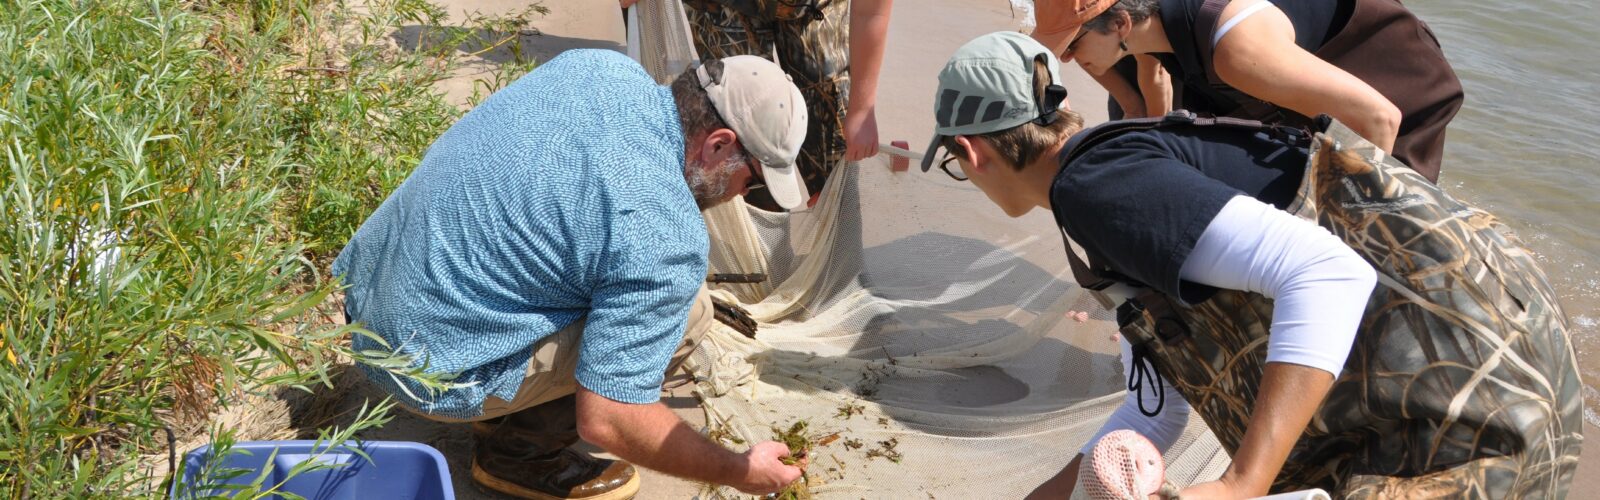 Researchers sifting through material in a net on the beach